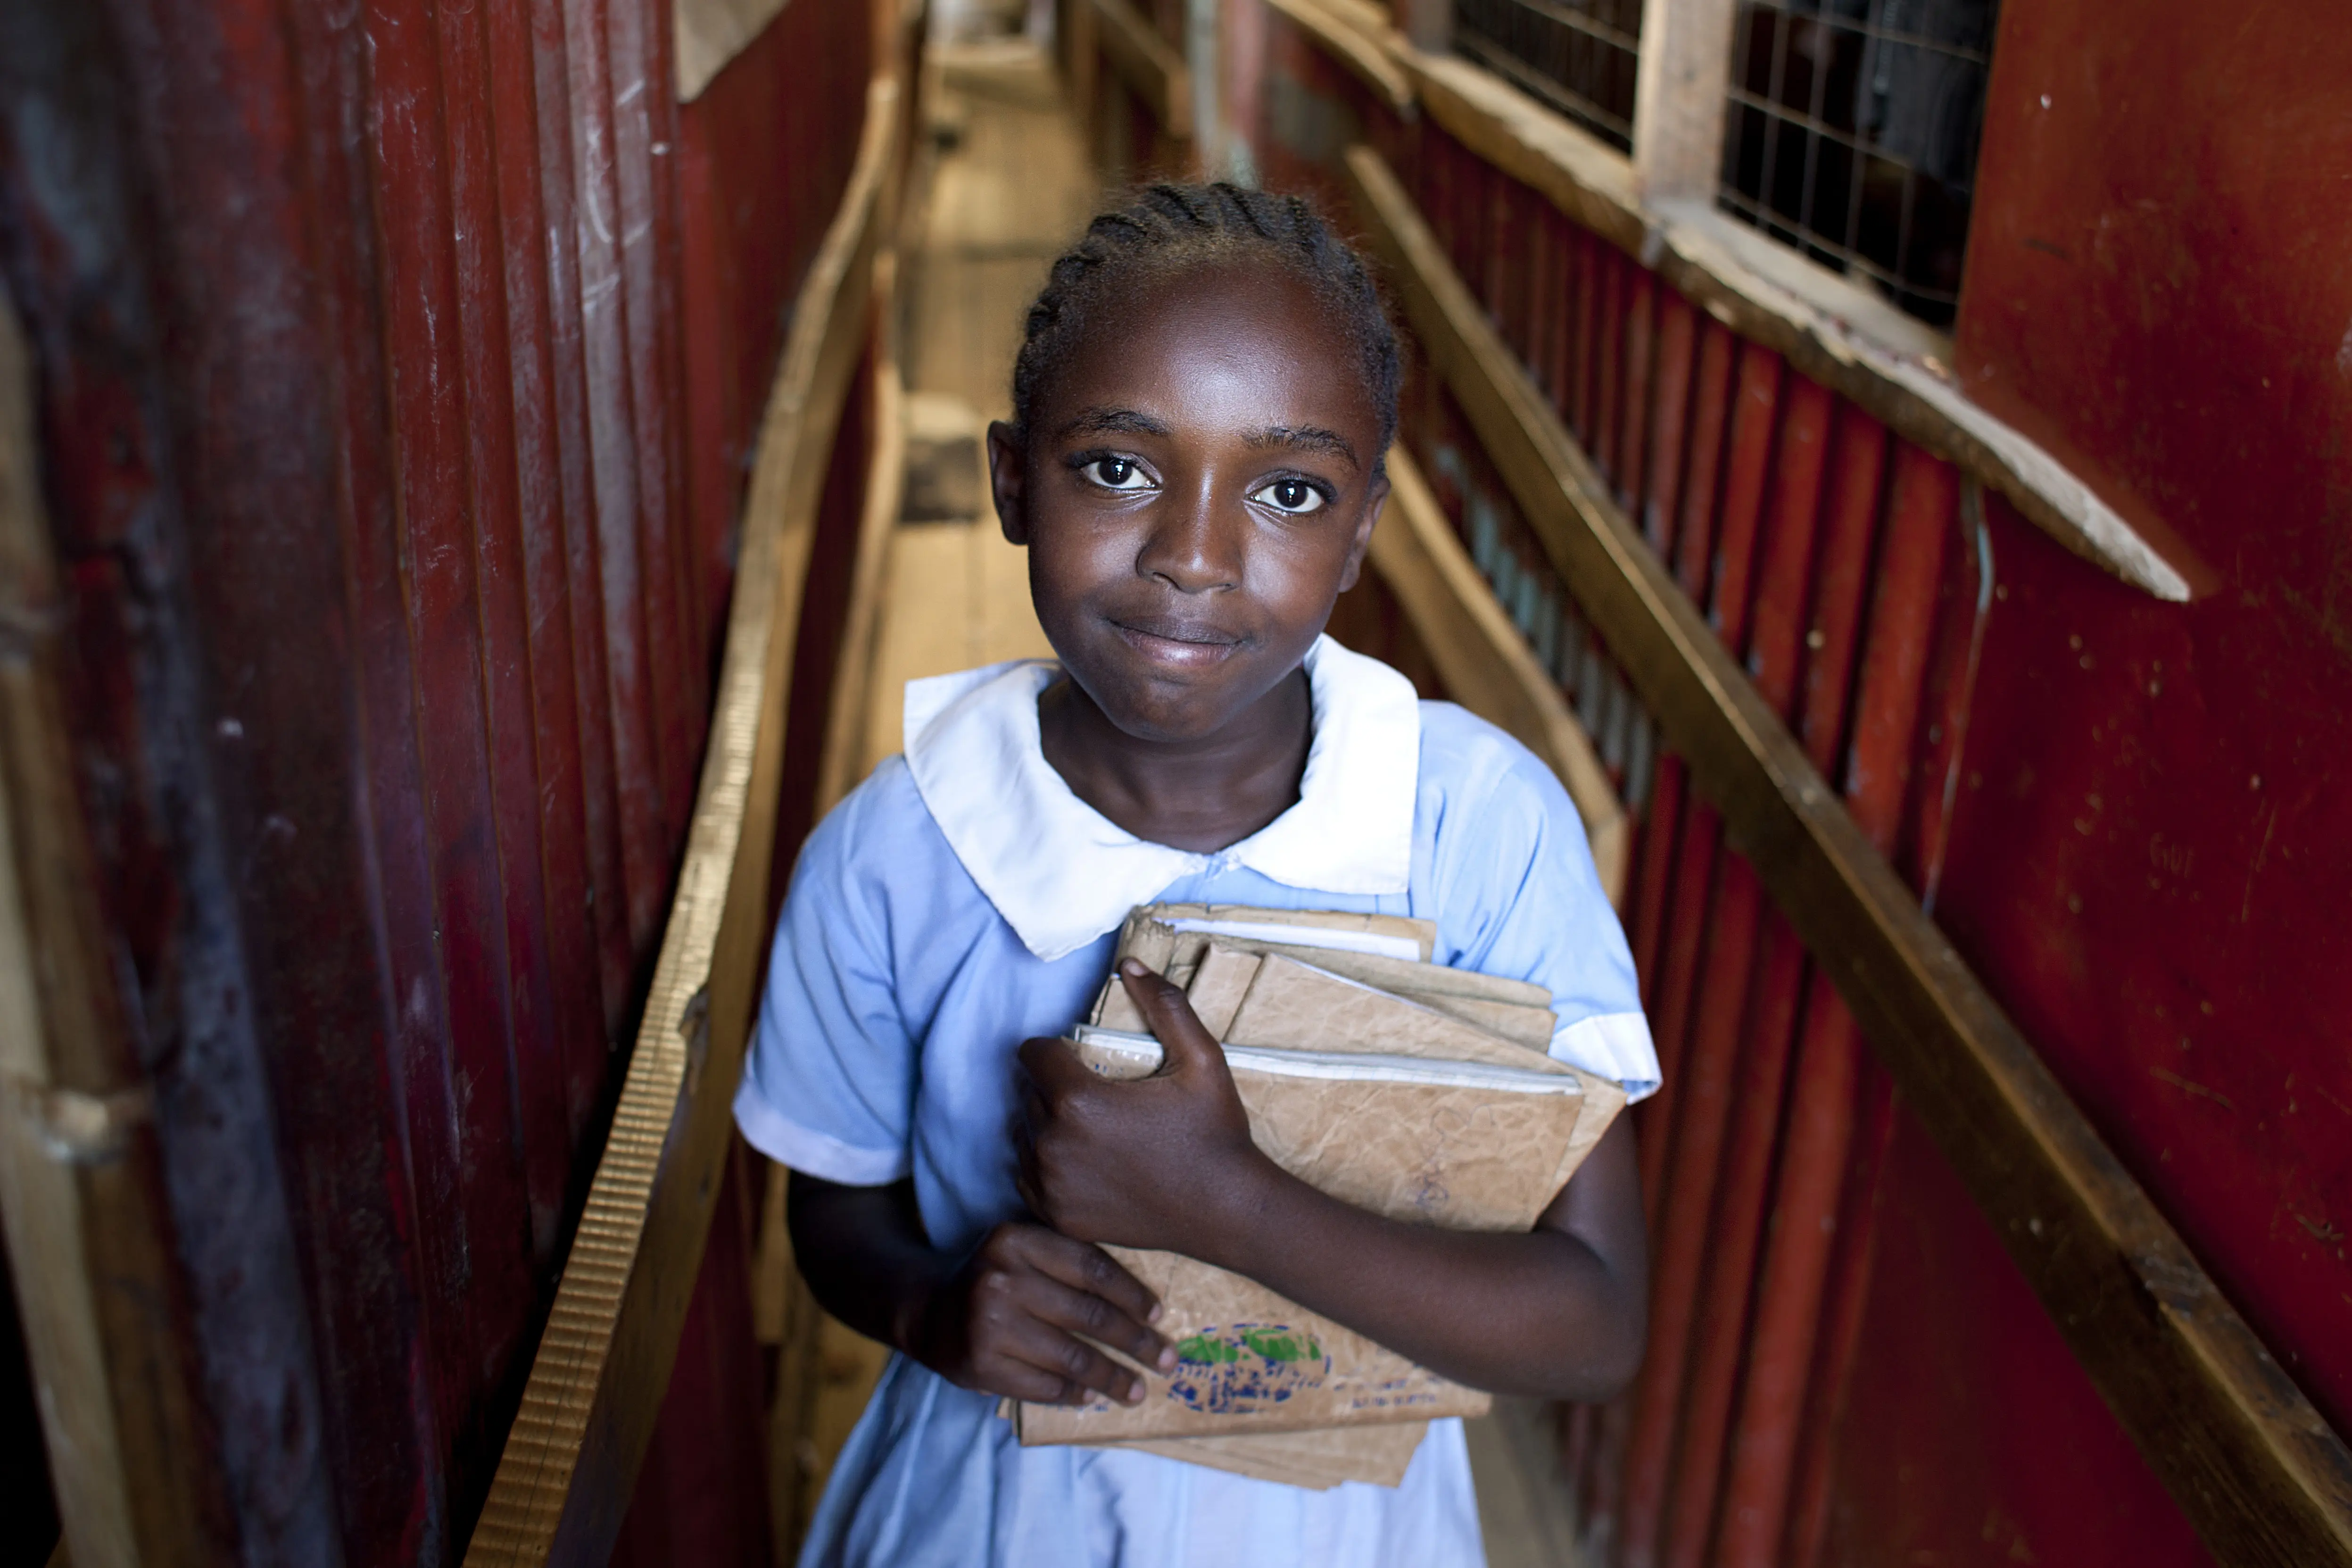 Elizabeth attends St. Francis School in Nairobi, Kenya, thanks to a cash transfer provided by Concern to her parents